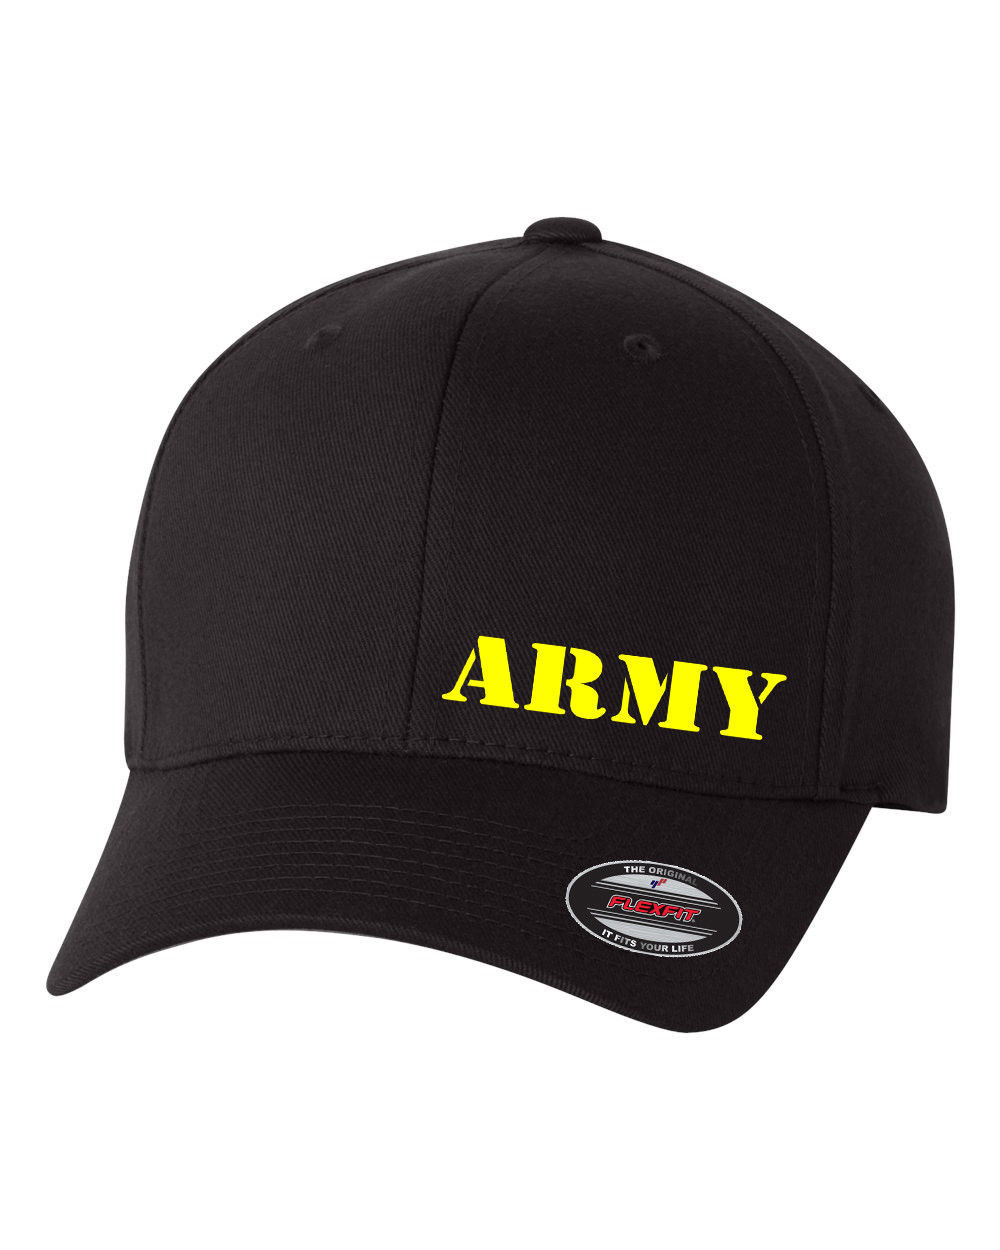 ARMY MILITARY SOLDIER FLEXFIT HAT CURVED or FLAT BILL *FREE SHIPPING in BOX* - $19.99